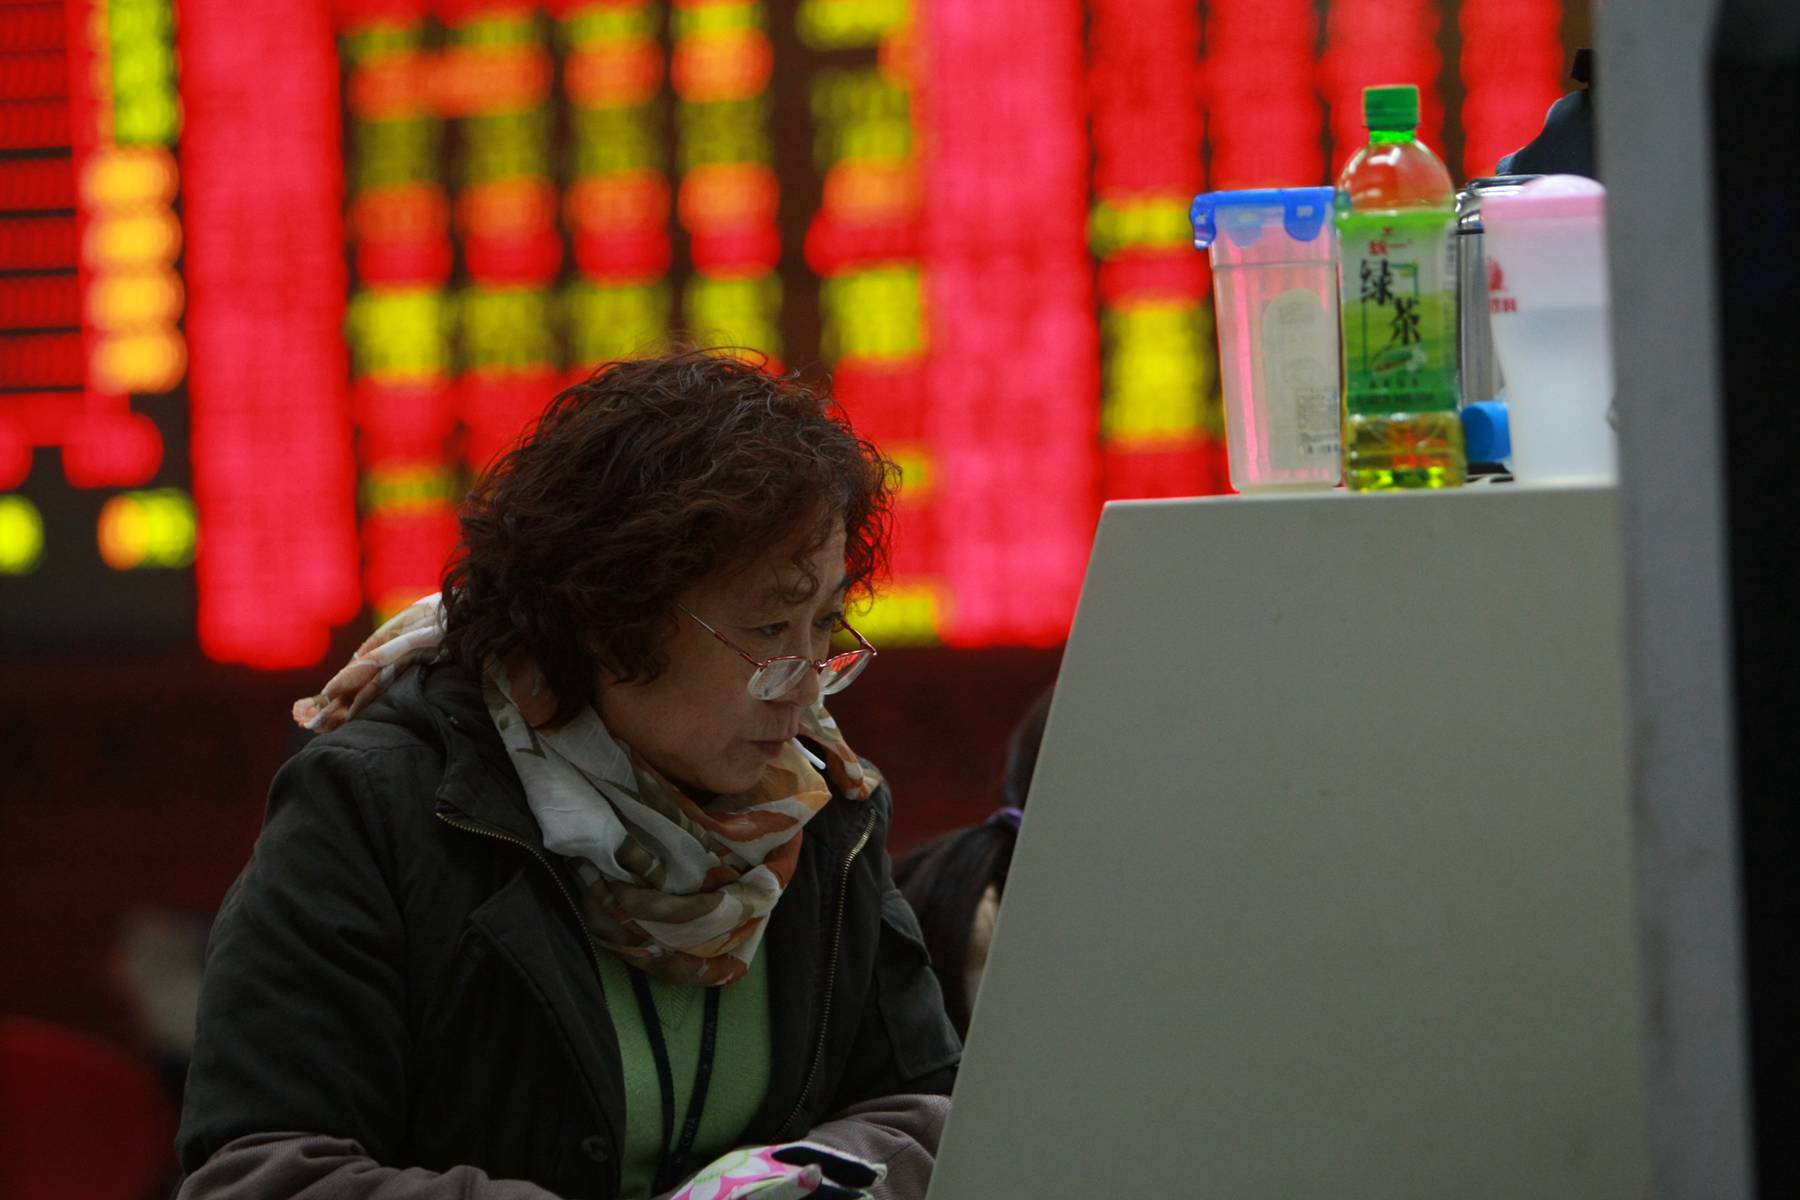 ChiNext Index closes higher at midday Monday 